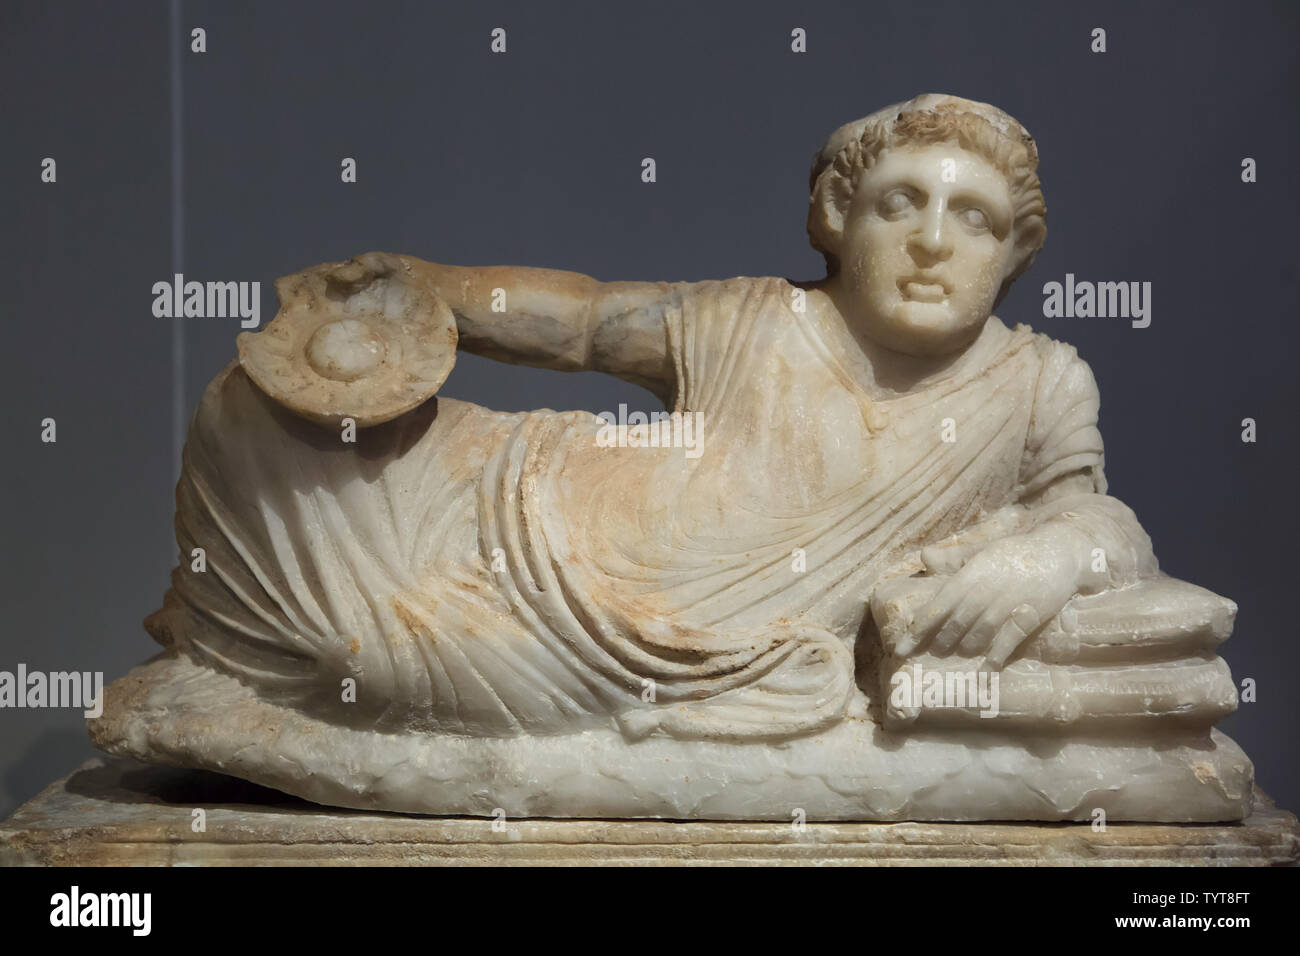 Reclining Man with Omphalos Bowl. Etruscan alabaster cinerary urn with a lid from the grave of the Calisna Sepu family dated from around 150 BC found in Malacena (Monteriggioni), now on display in the Altes Museum in Berlin, Germany. Stock Photo